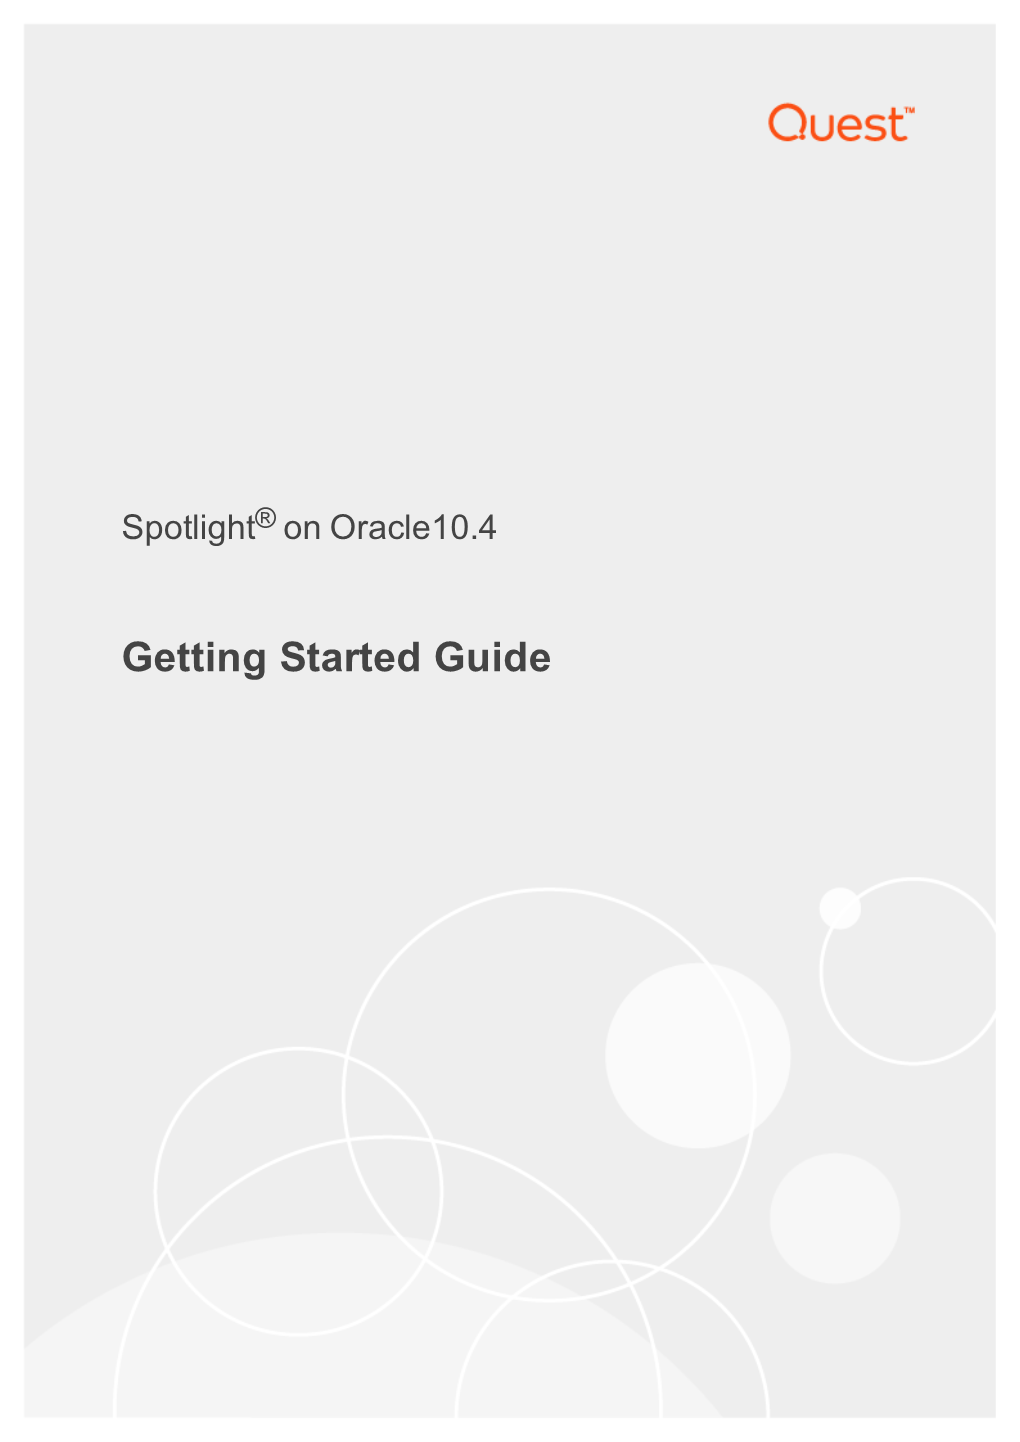 Spotlight on Oracle Getting Started Guide Updated - June 2017 Software Version - 10.4 Contents